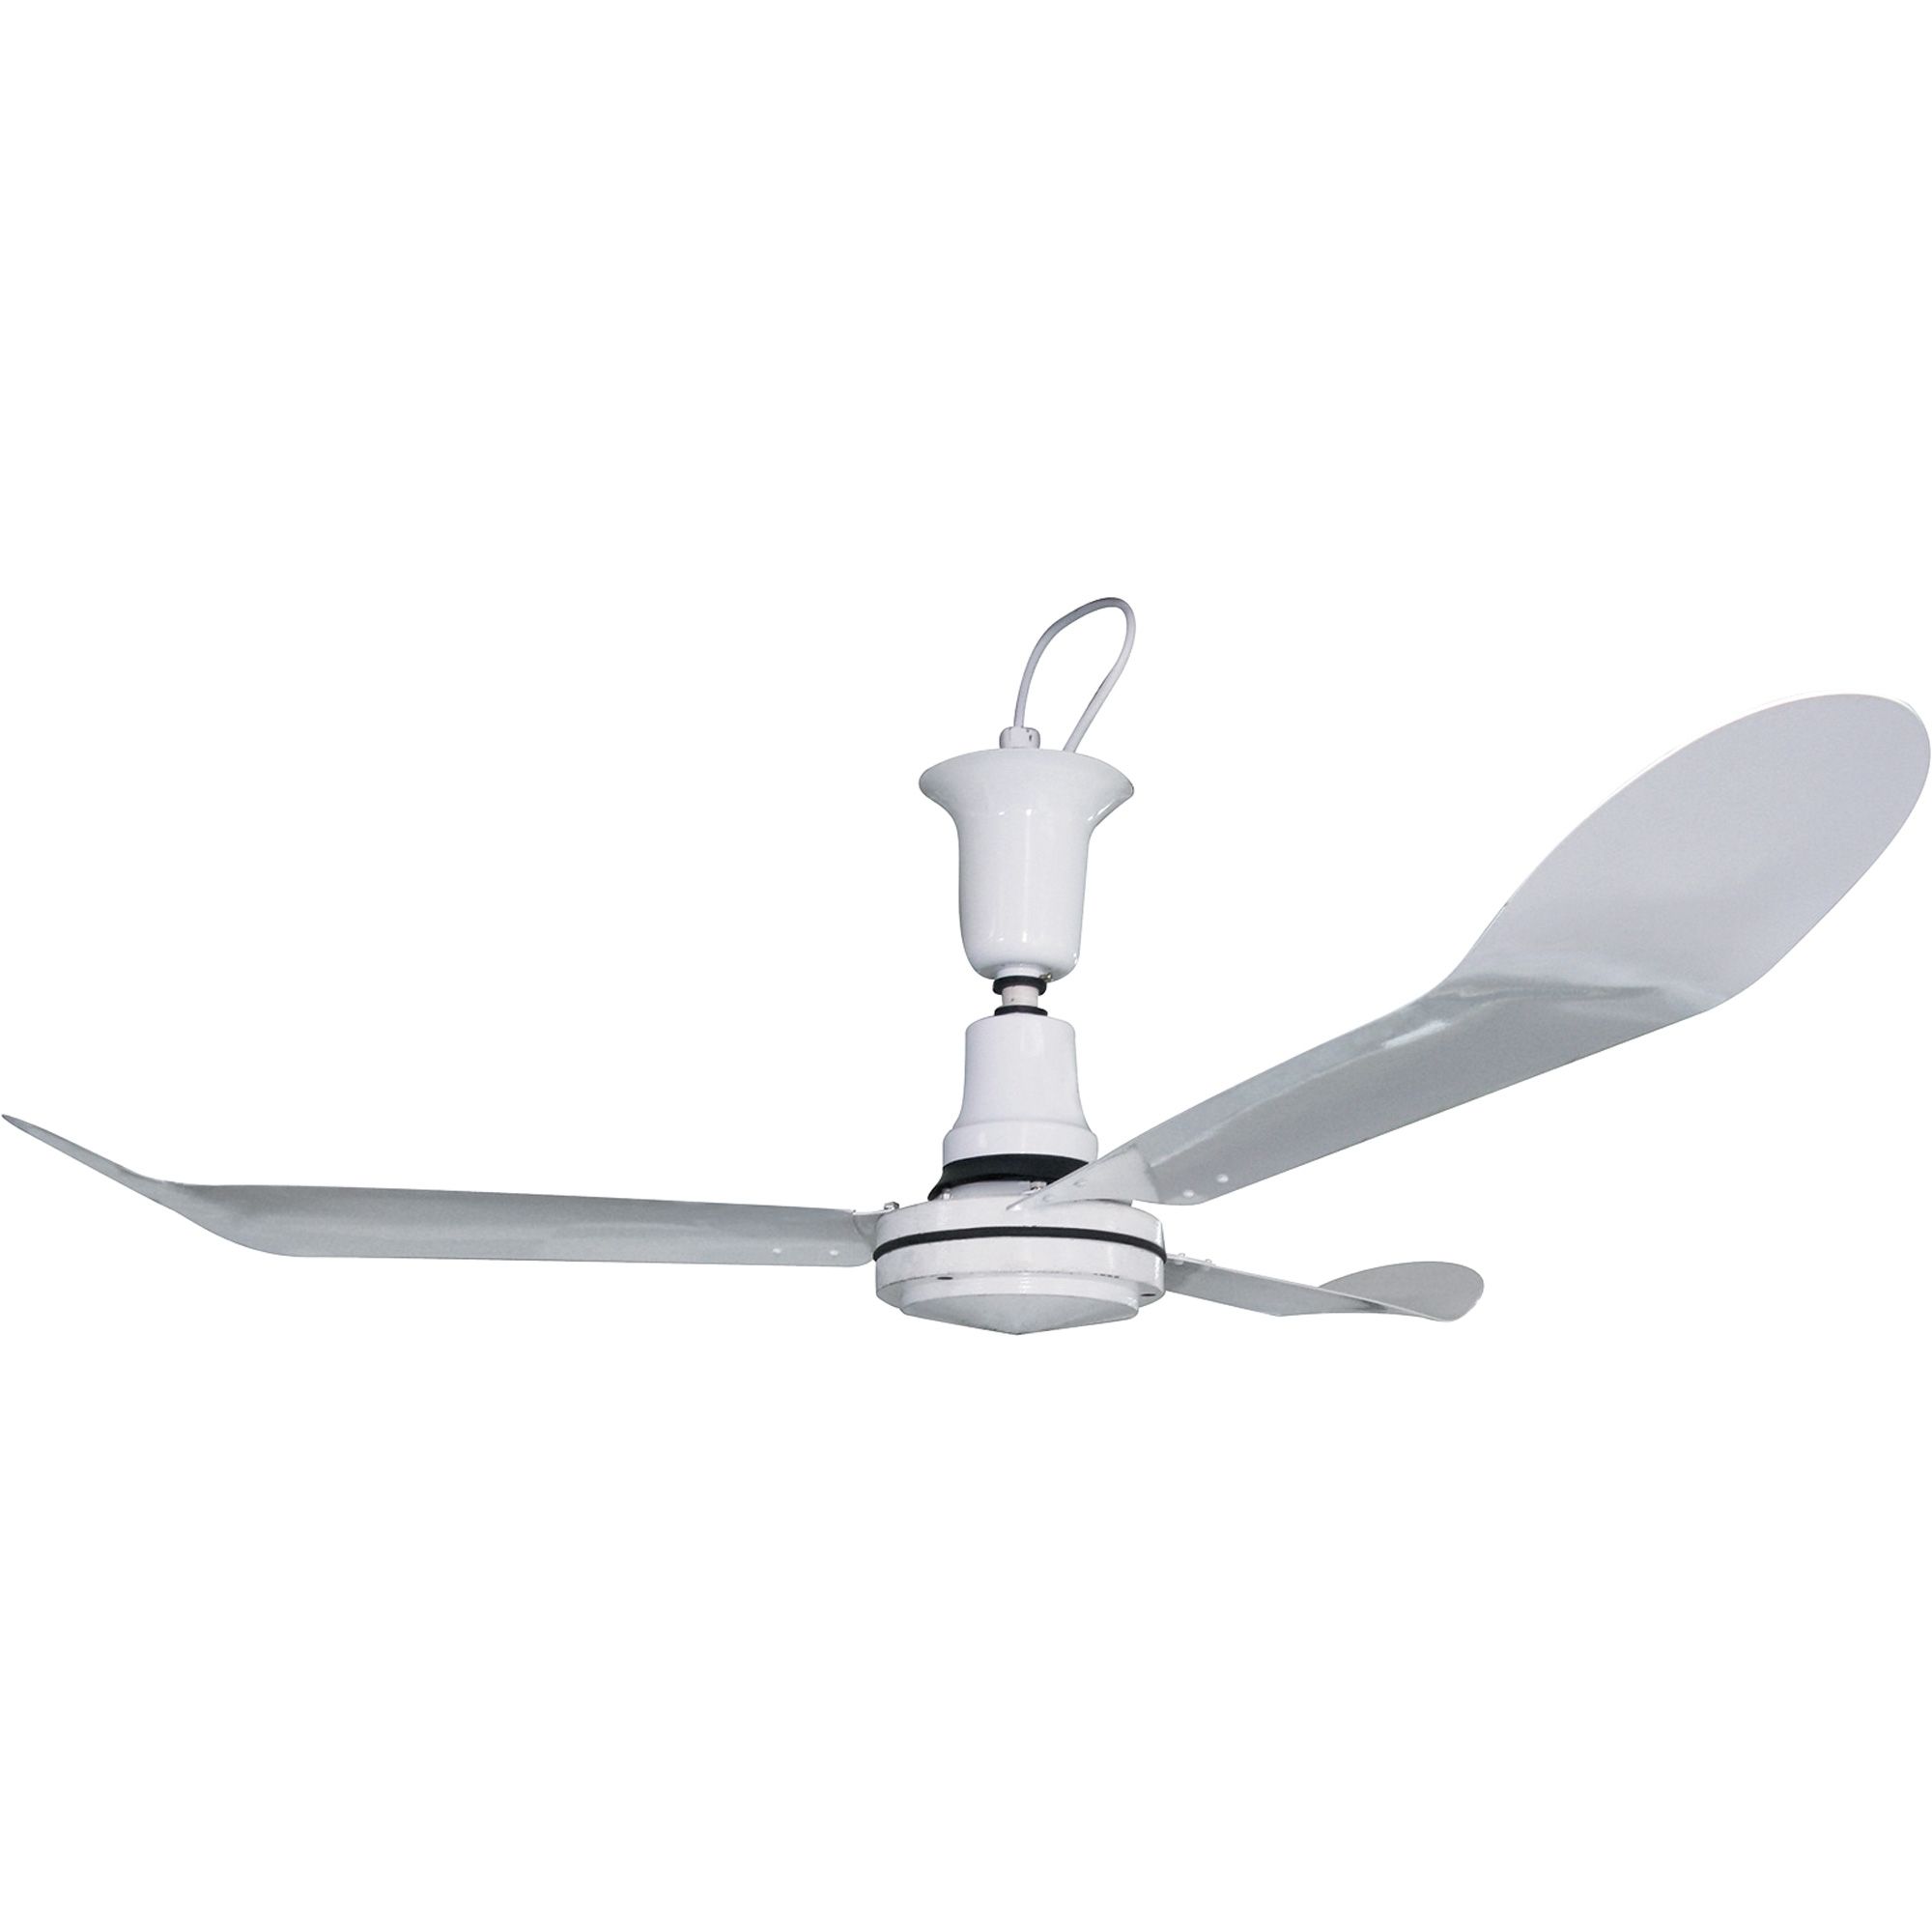 Well Liked Outdoor Ceiling Fans Under $100 Throughout J&d Mfg Industrial Fans Garage Shop Fans Renowned Ceiling Fans Under (View 5 of 20)